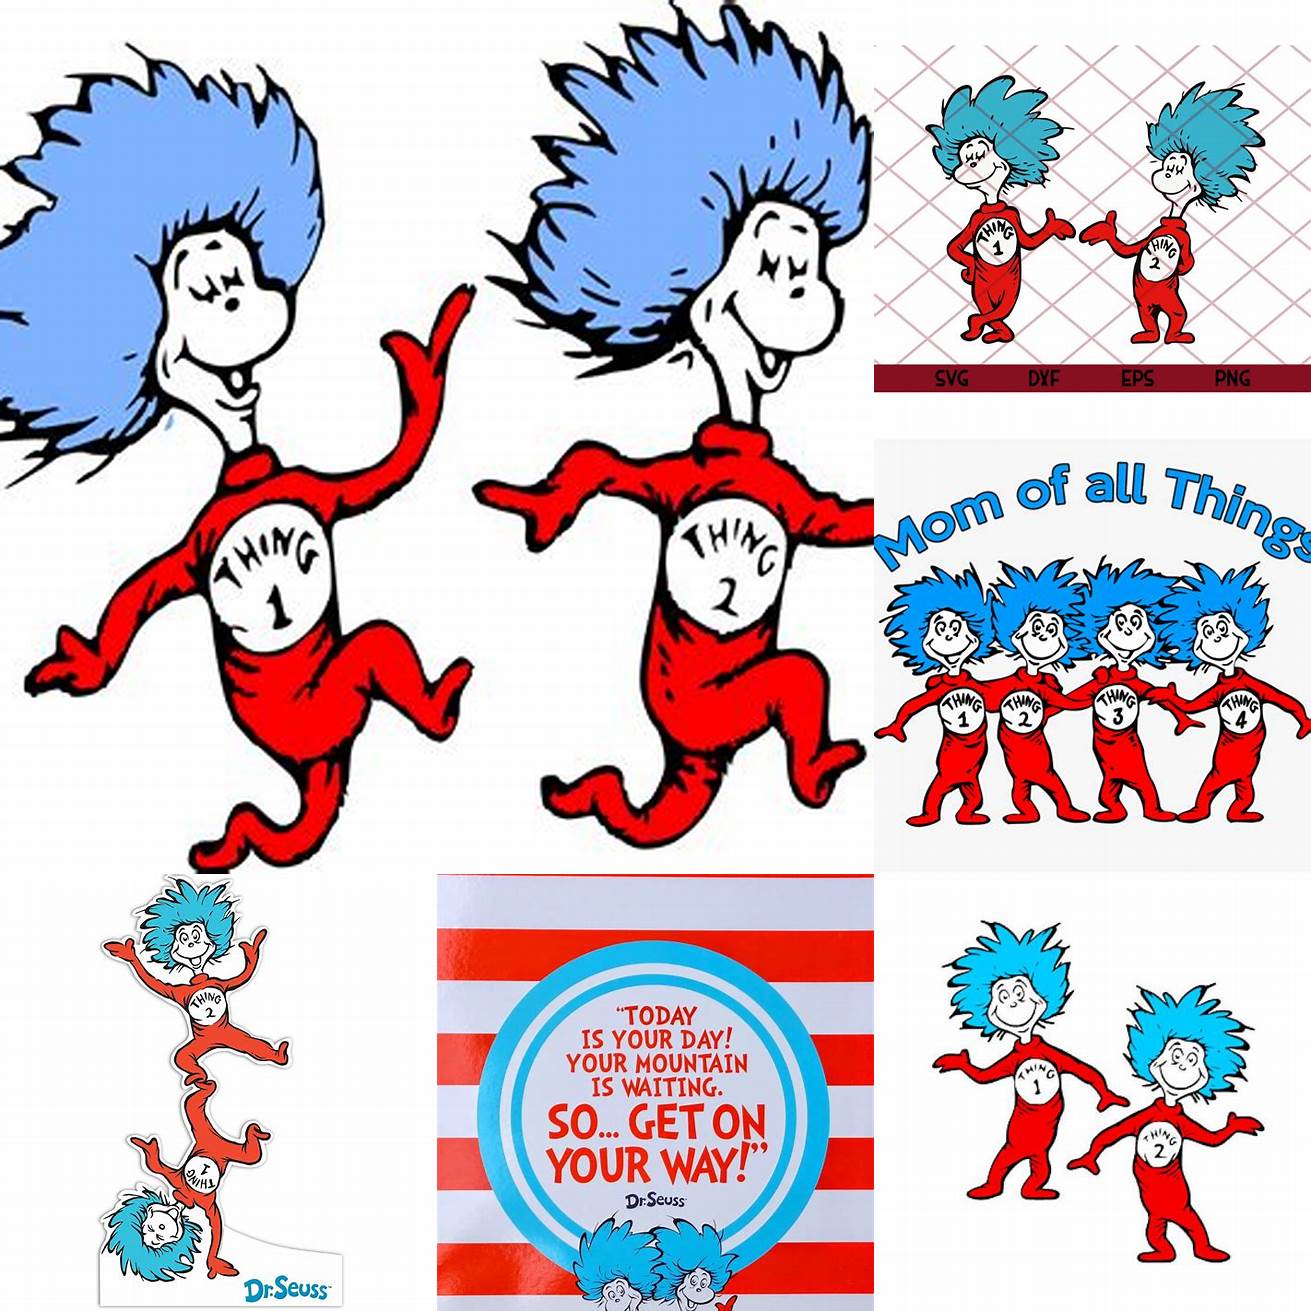 Take two drinks every time Thing 1 and Thing 2 appear on screen or are mentioned in the book